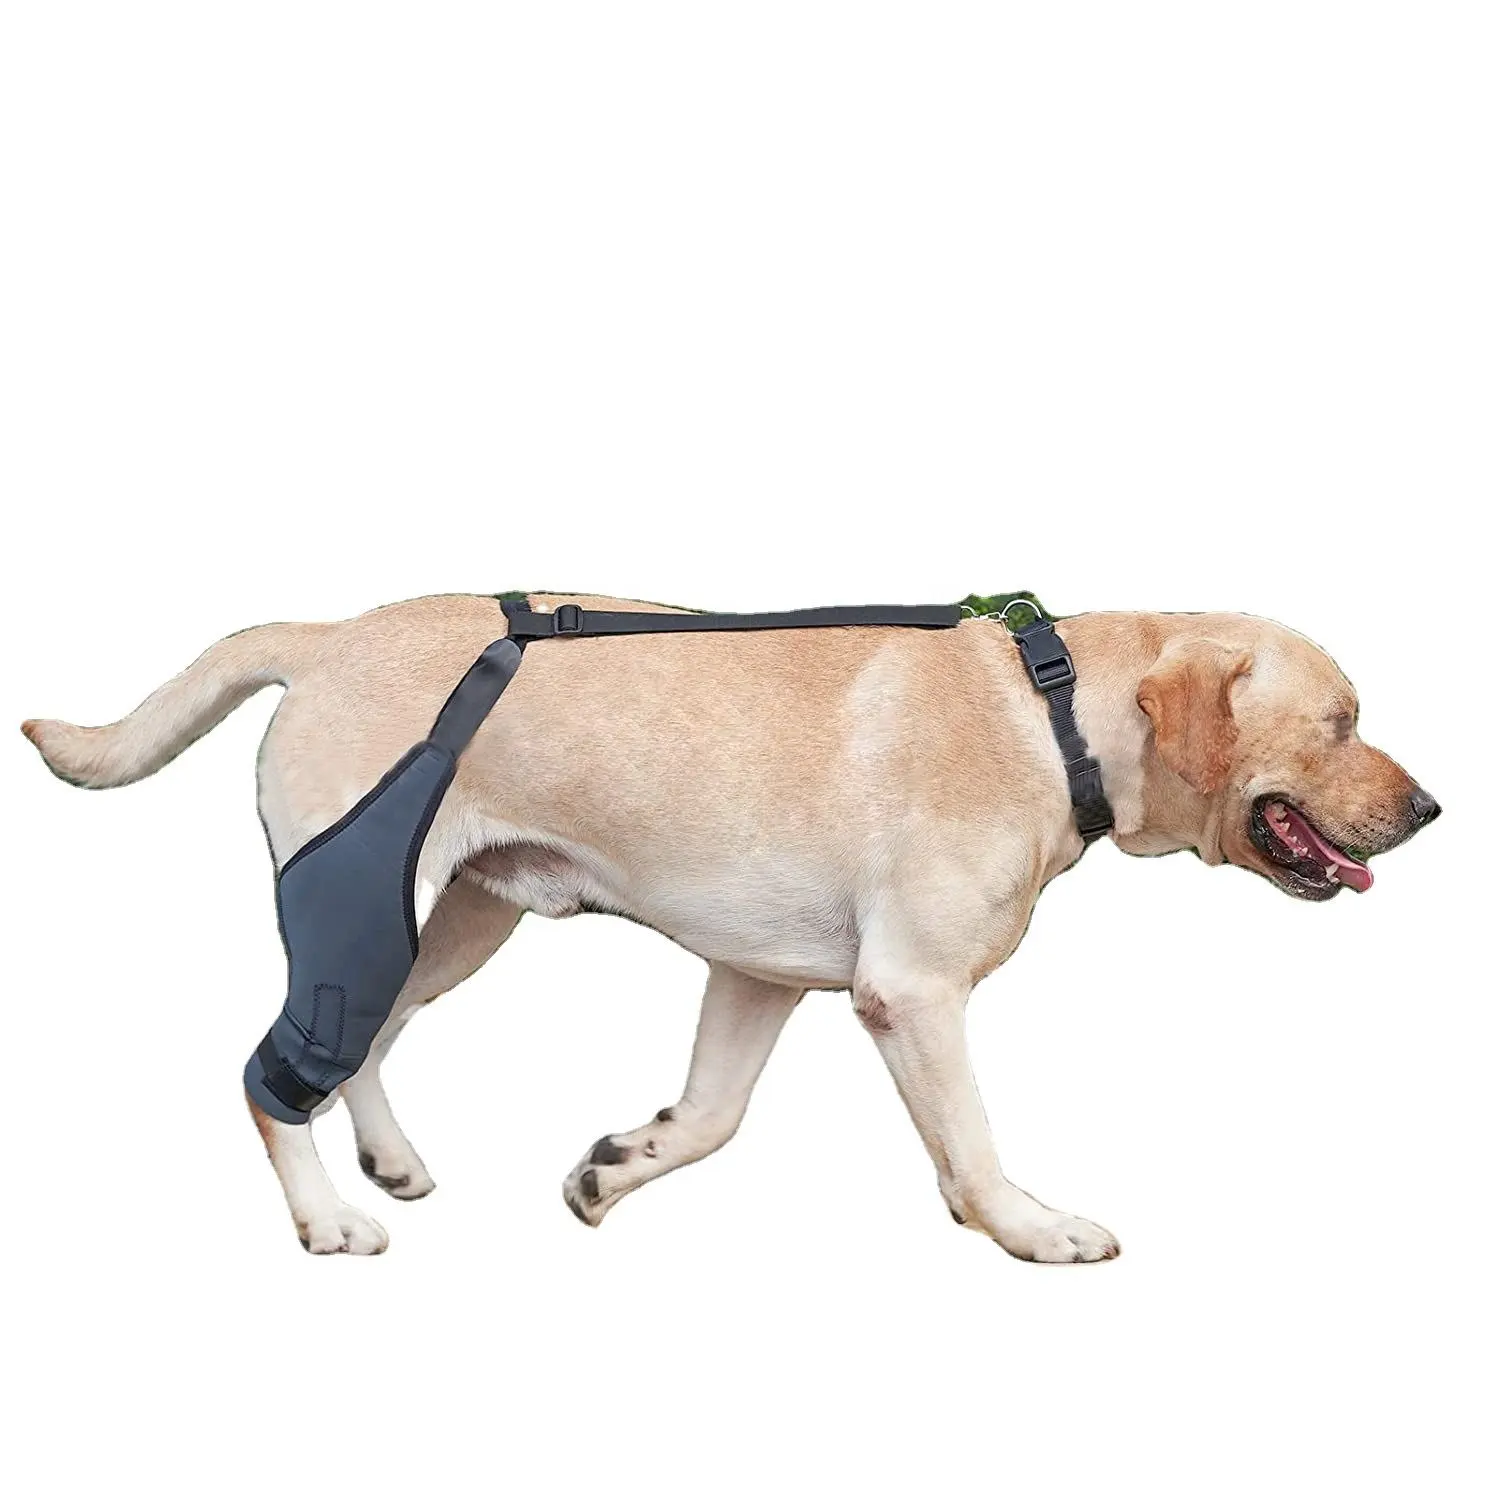 Pet Dog Knee Brace for ACL with Metal Side Stabilizers Extra Support Reduces Pain Adjustable Rear Leg Braces For Dogs